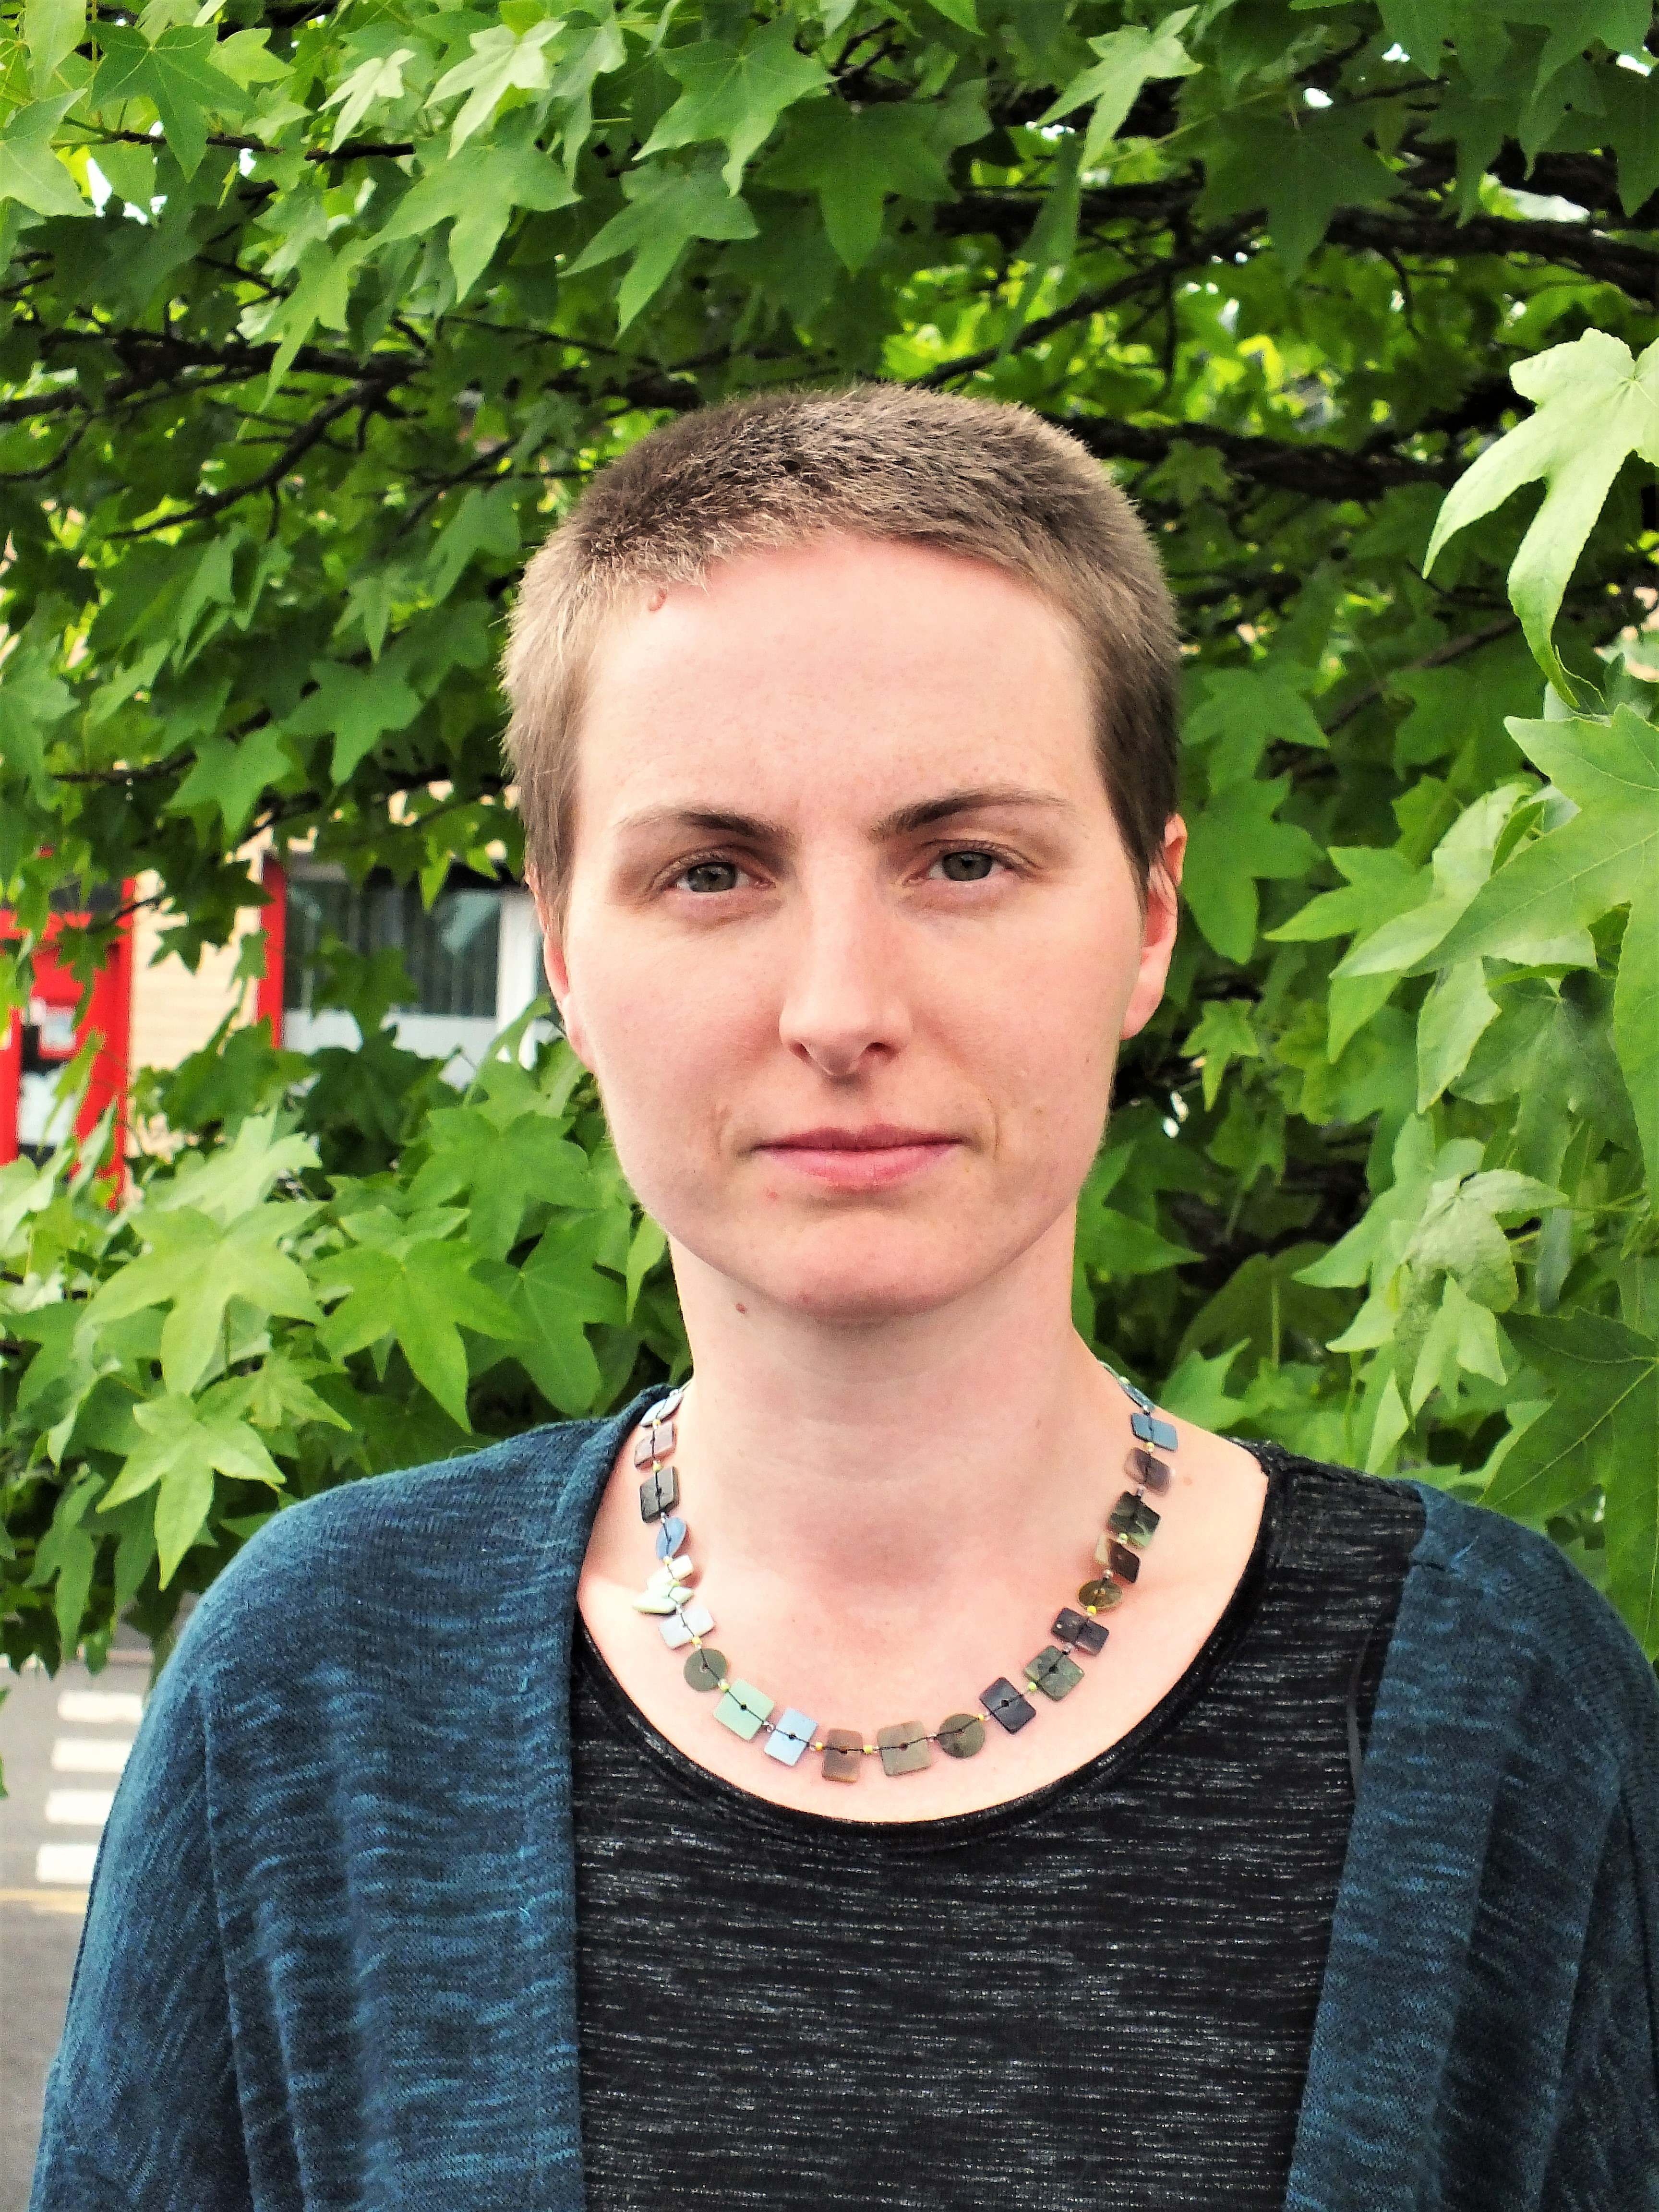 photograph shows Orla, who is a white person with short light brown hair. 